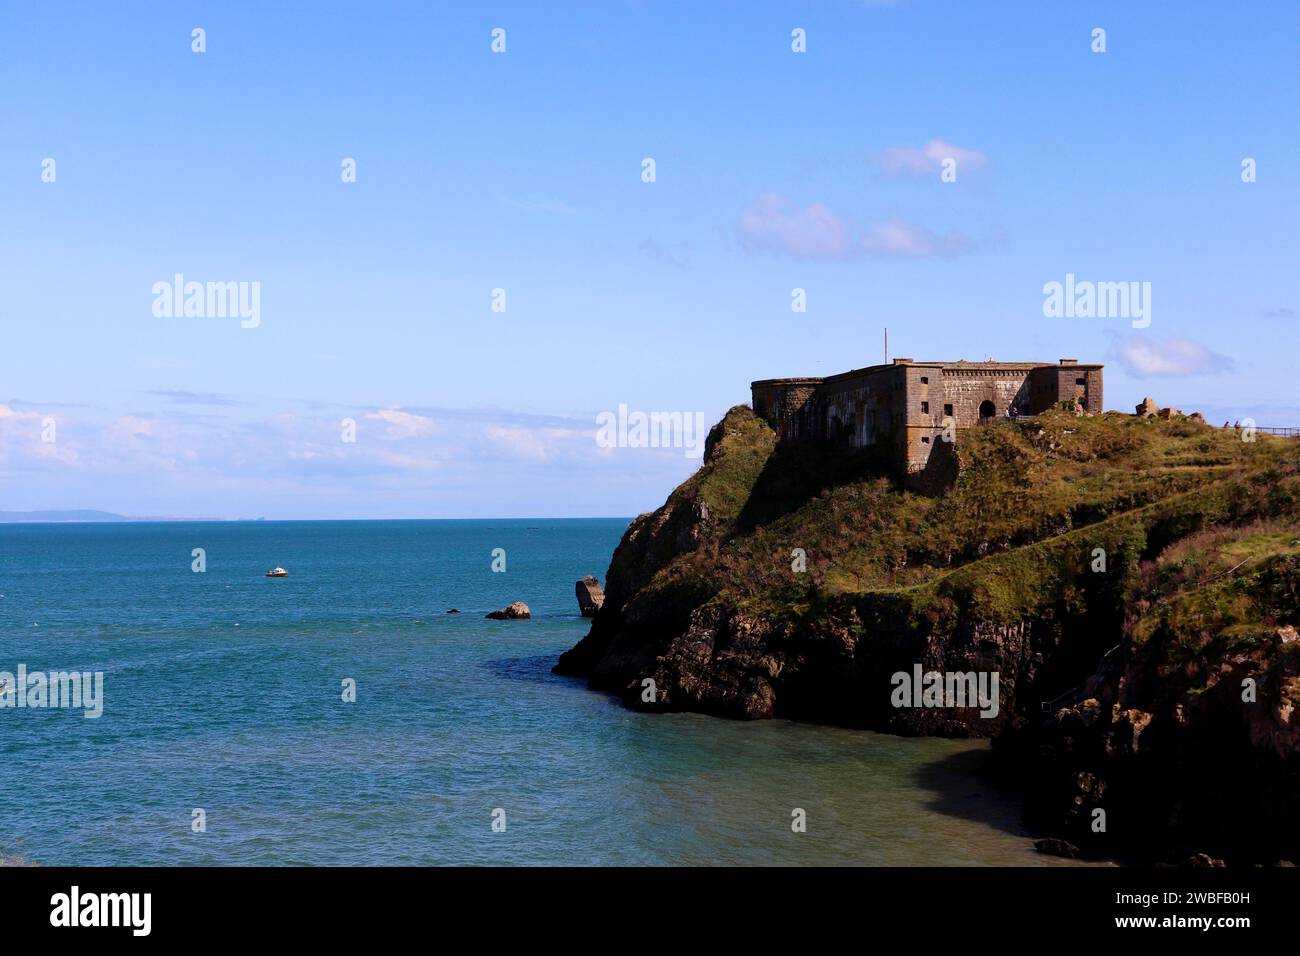 Historic stone castle situated on a scenic island surrounded by blue seas in Tenby. Stock Photo